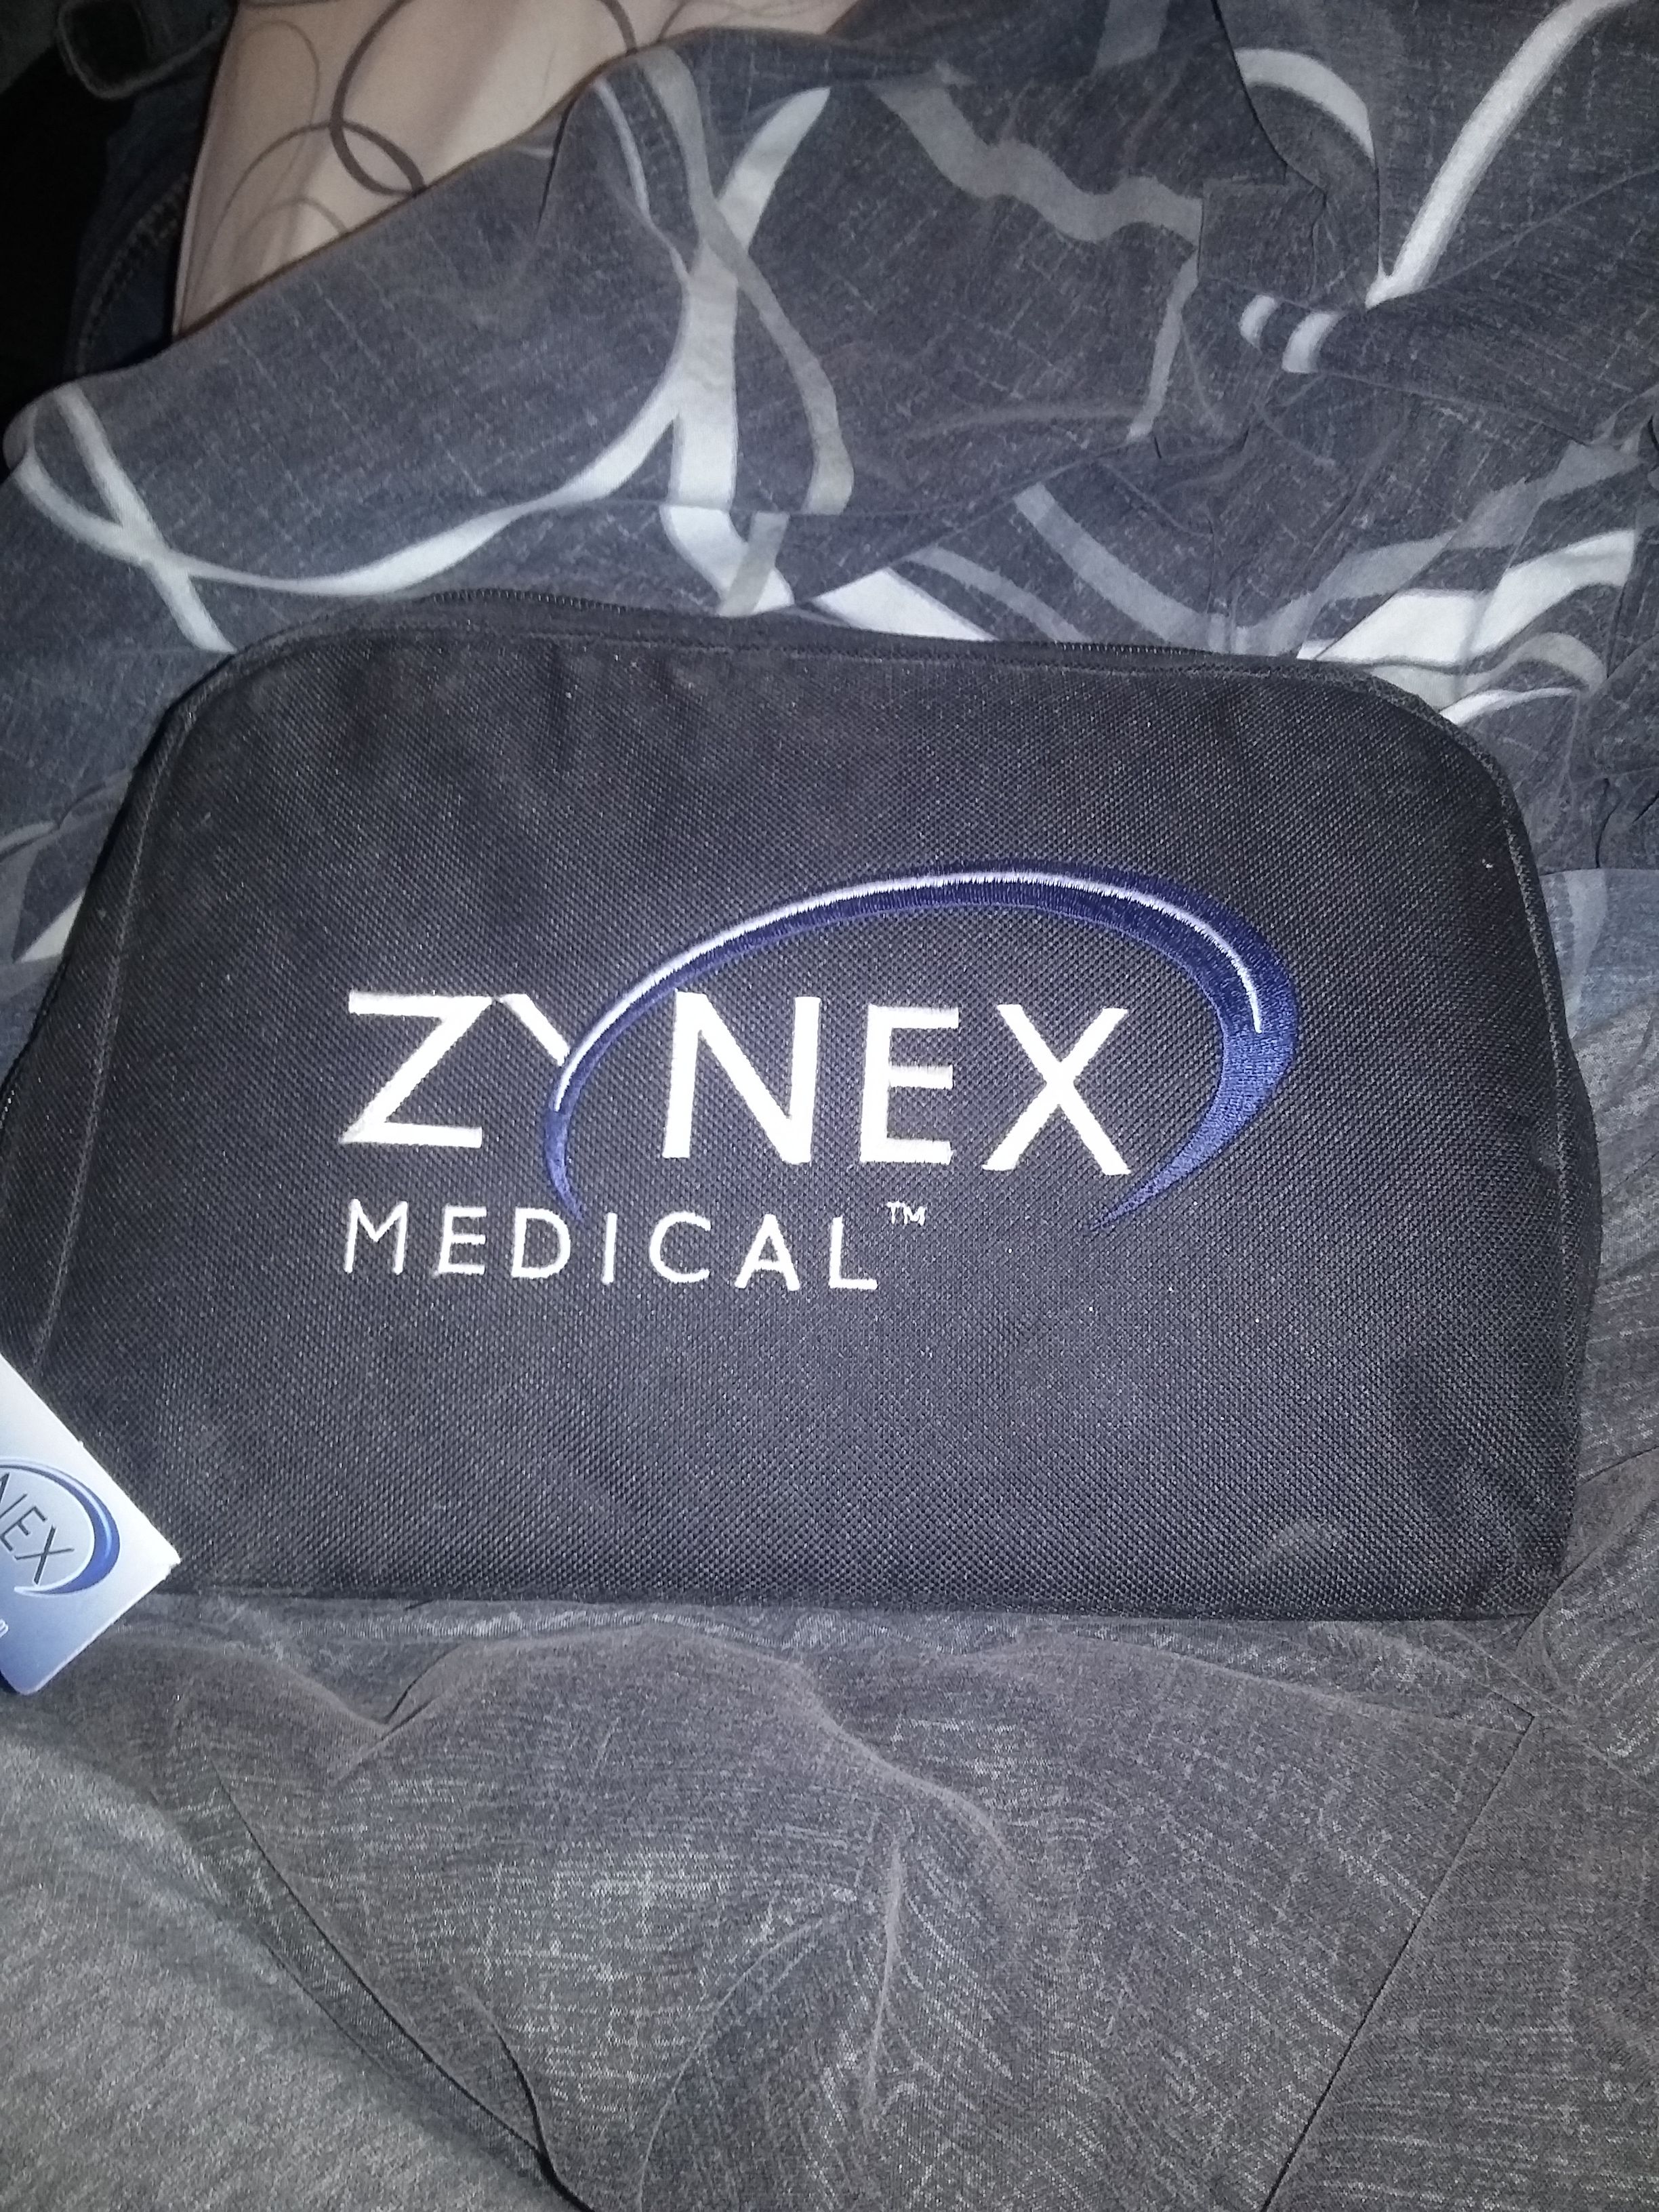 zynex next wave tens unit - general for sale - by owner - craigslist